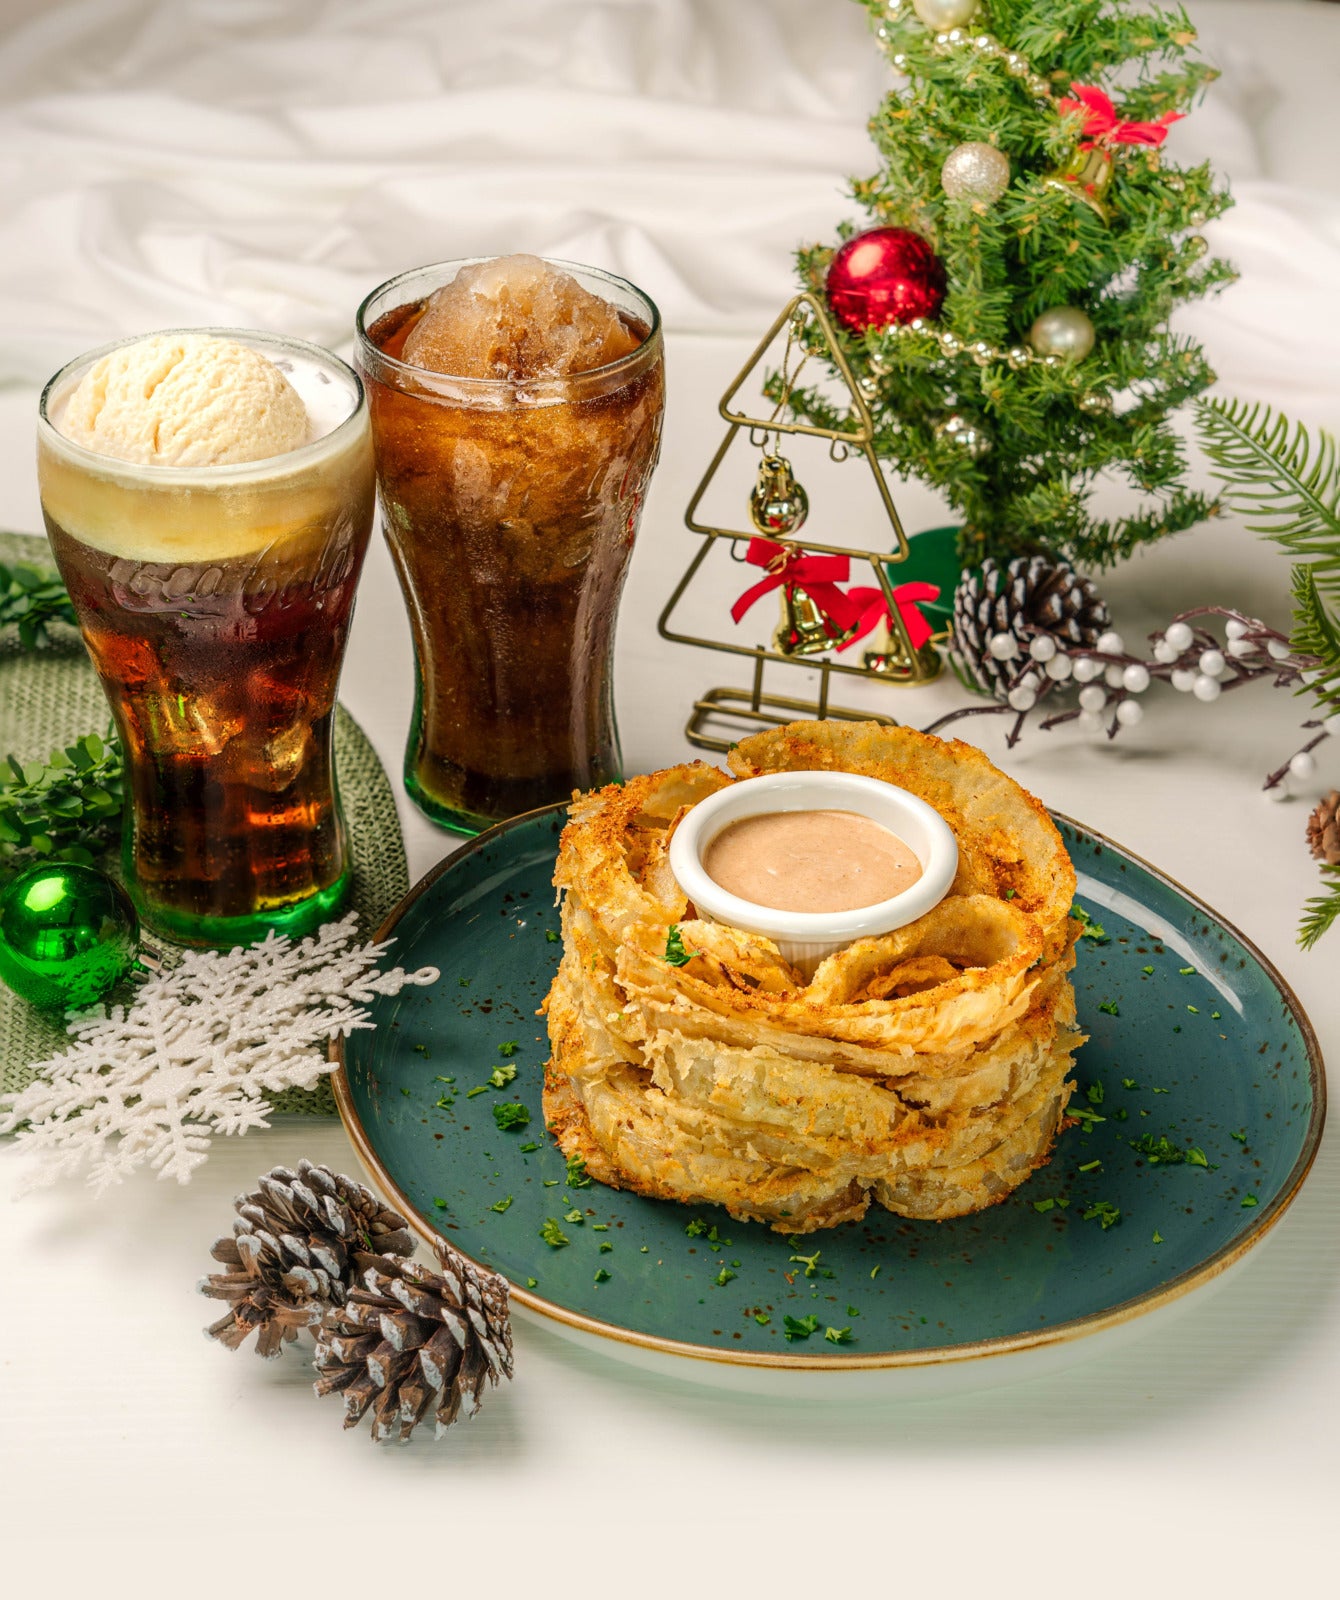 6 Onion Loaf with Cola Dip Coca Cola Float Frosted Coca Cola